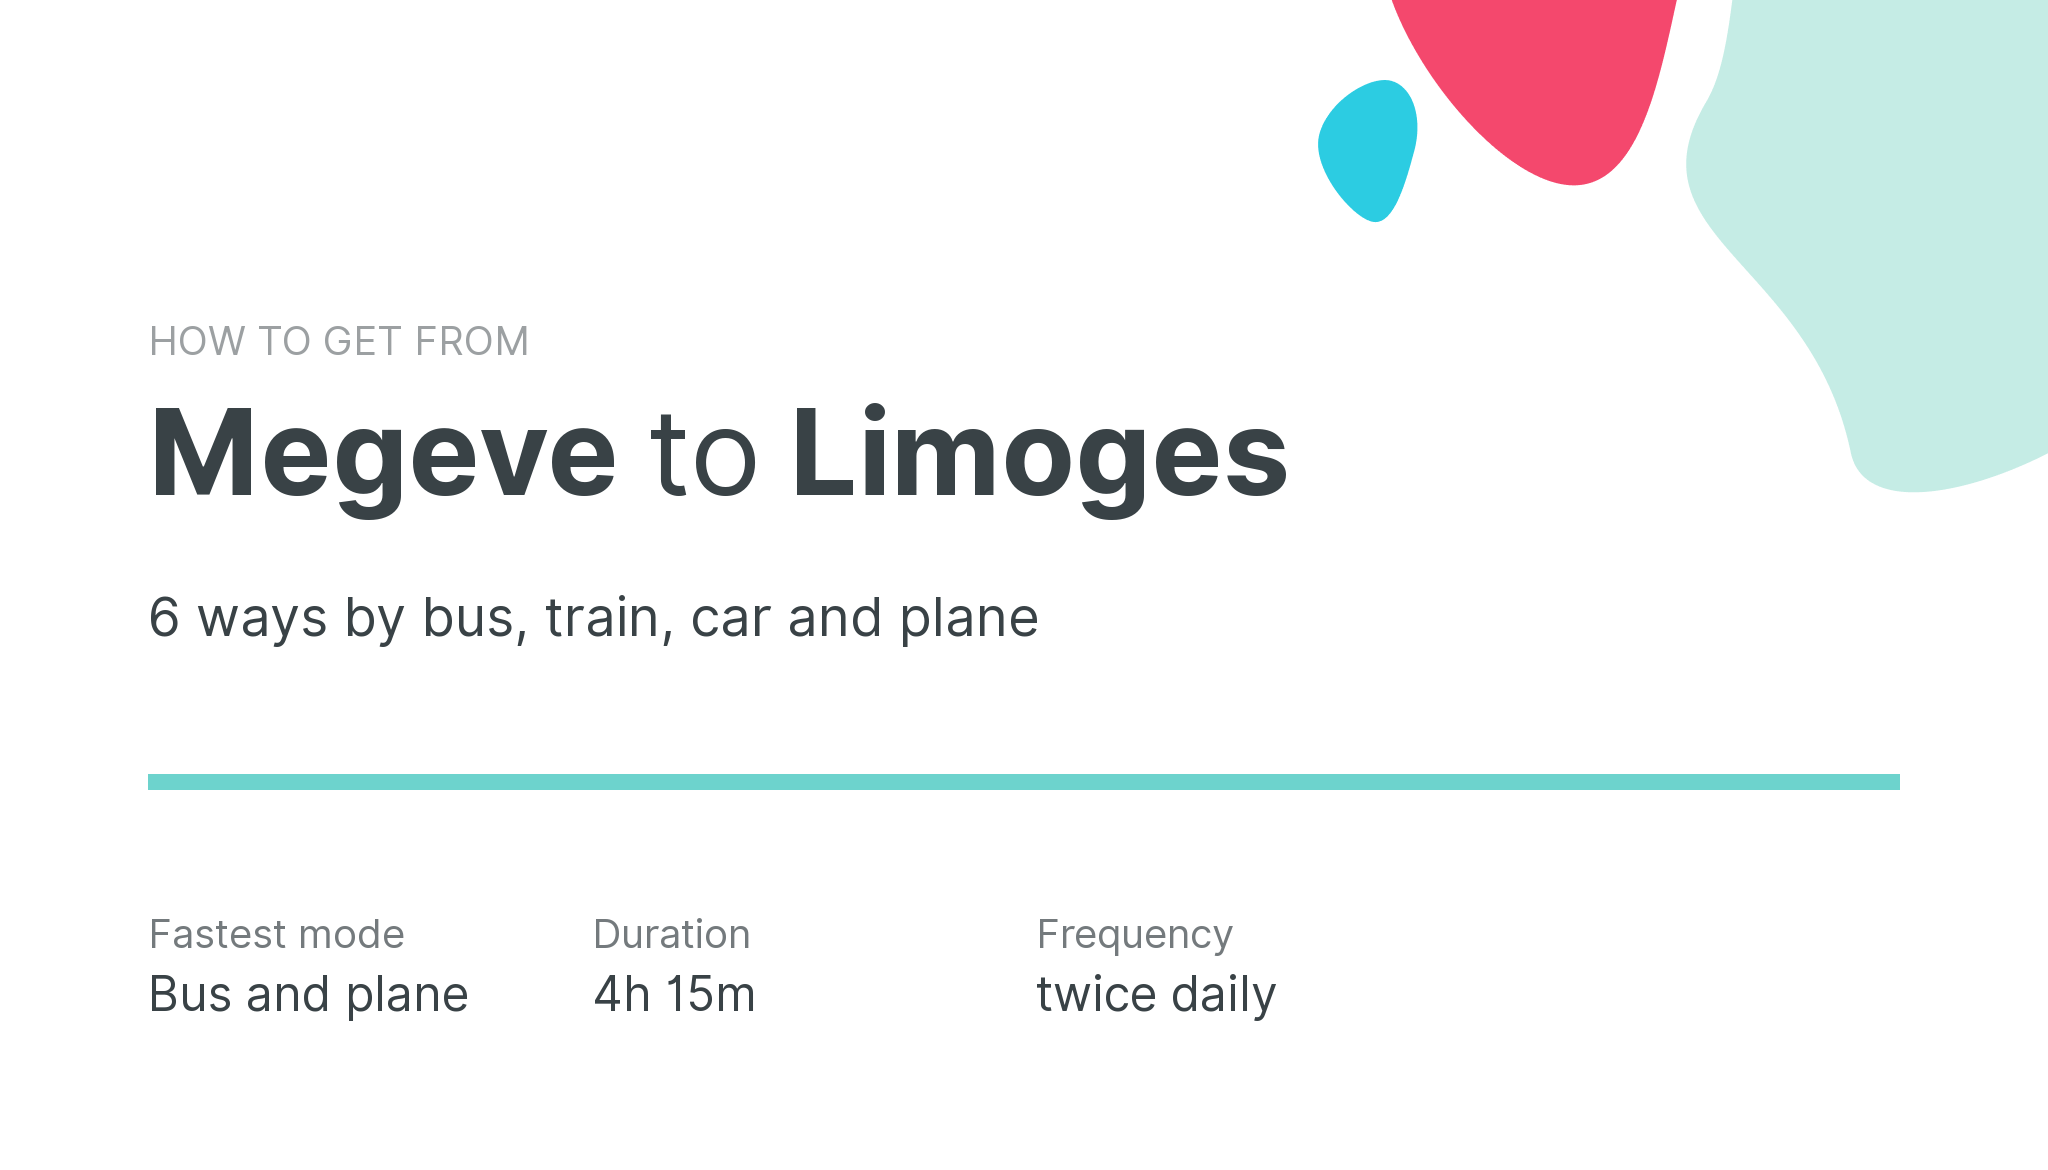 How do I get from Megeve to Limoges